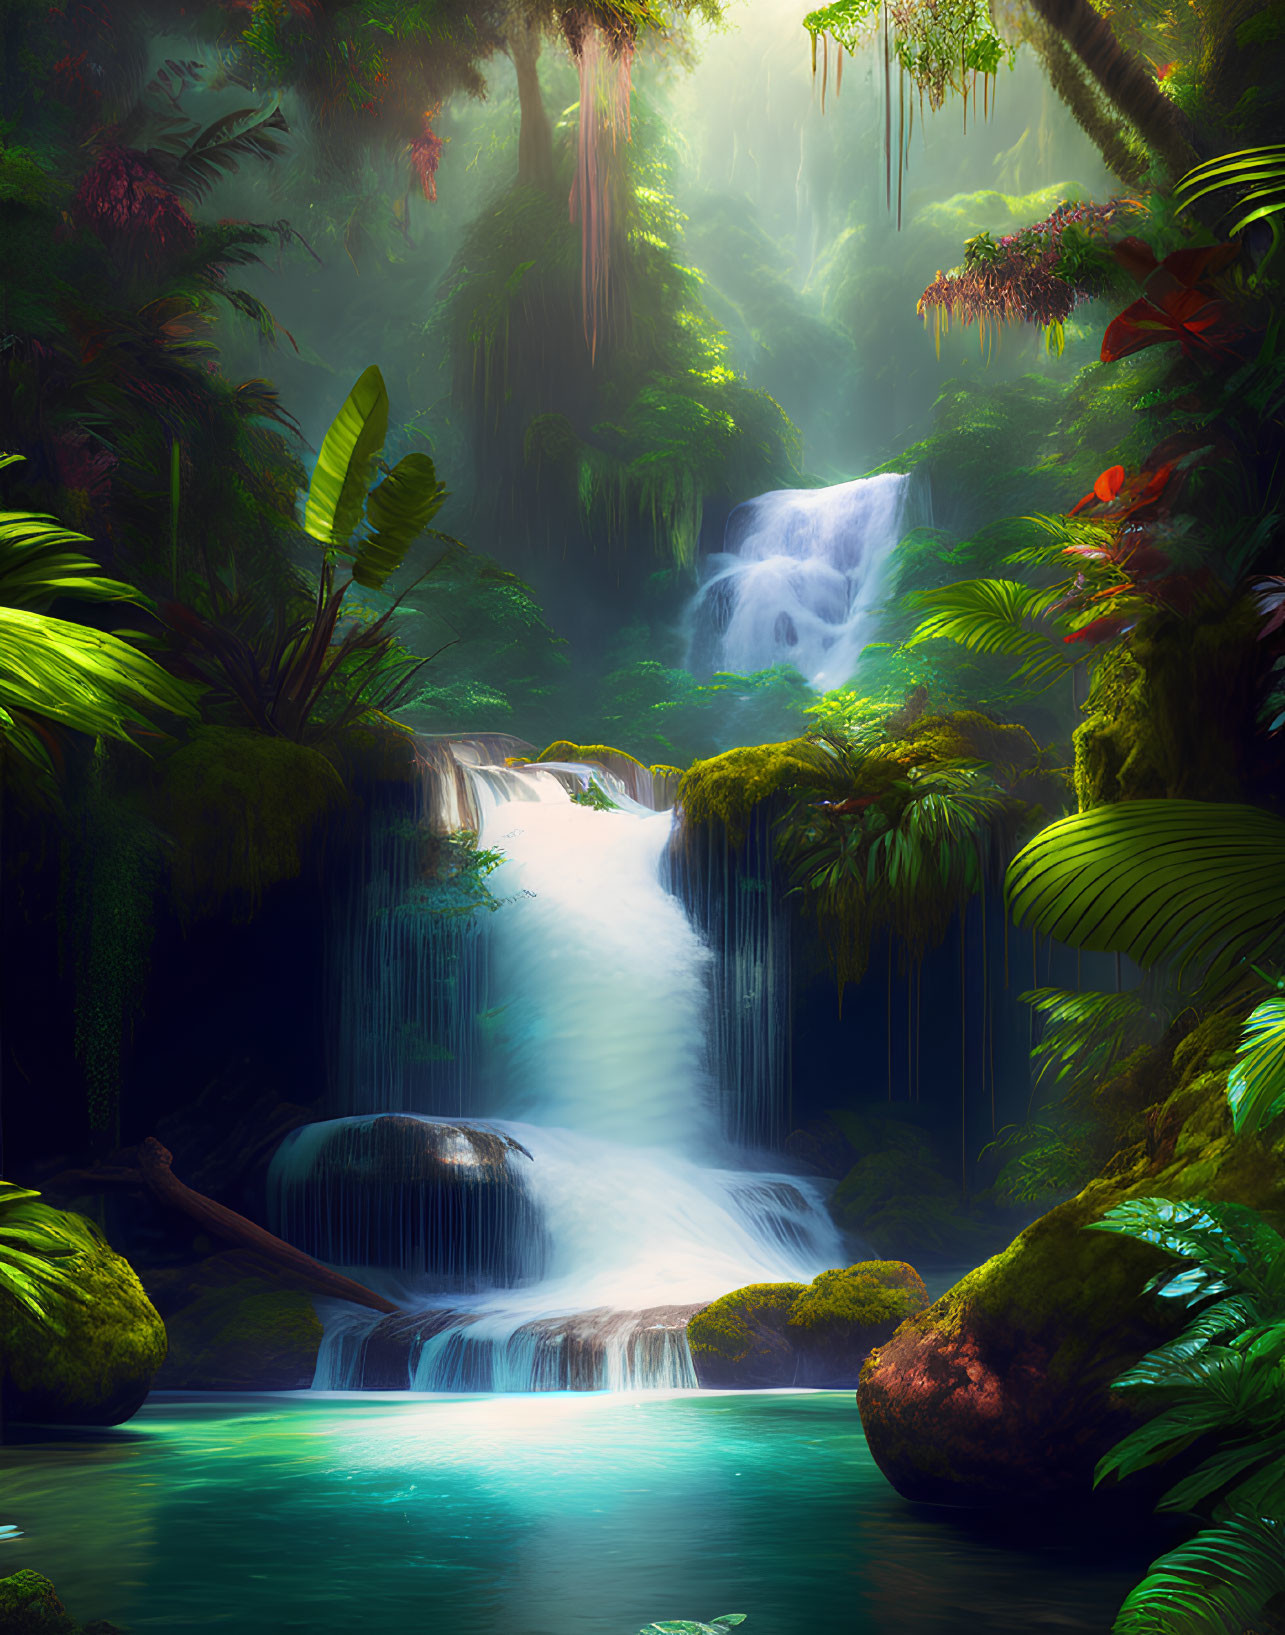 Lush Tropical Forest with Cascading Waterfall and Greenery